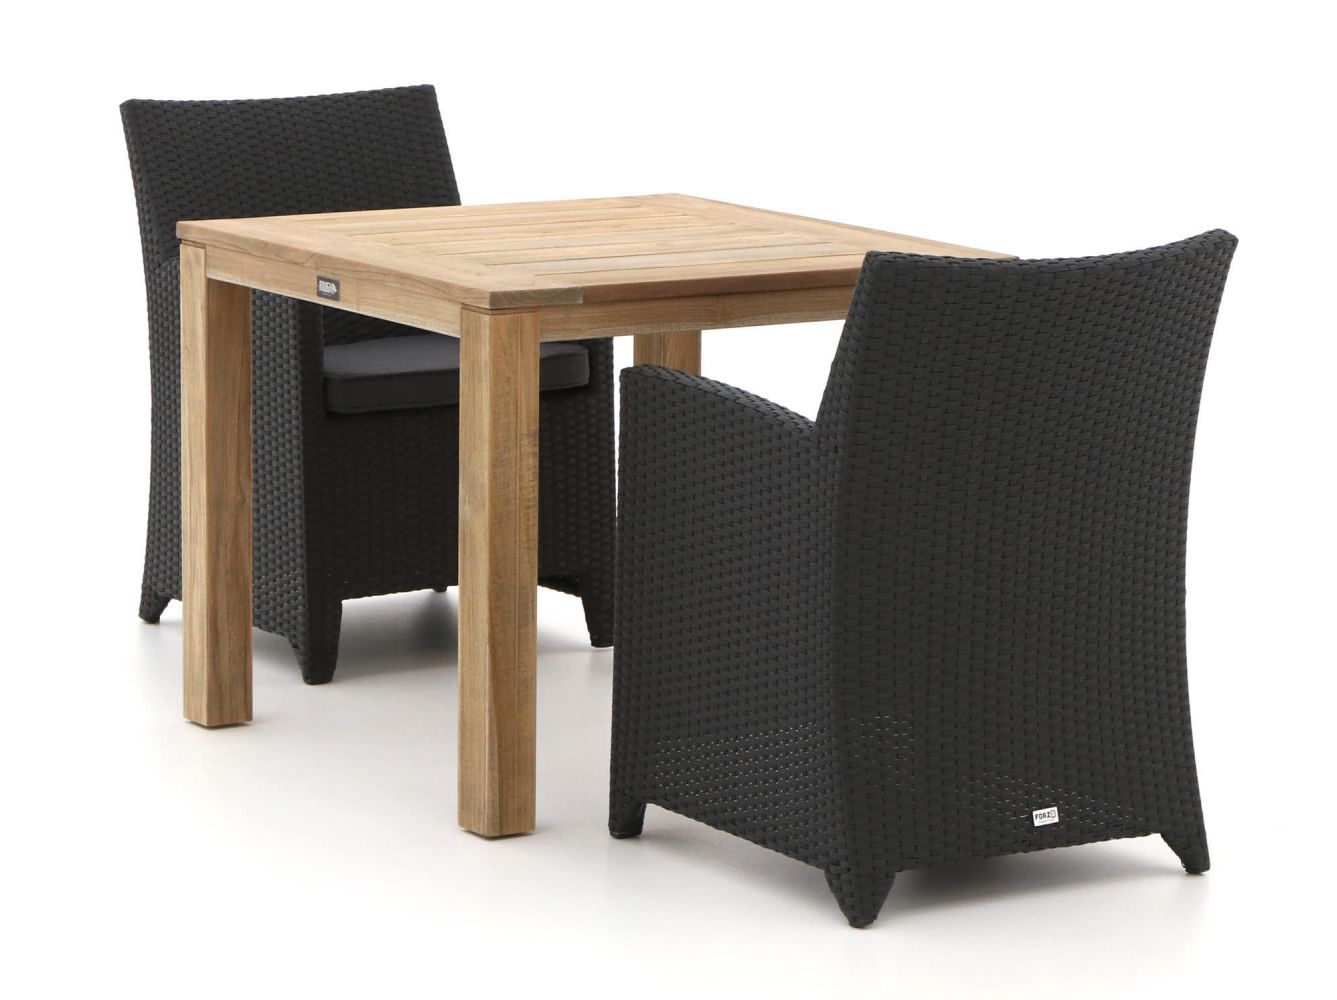 e01f72e87de4960e2b960c73c0fa857dfb37c0e9 113683 p01 swfwzrdooxeove0a - Forza Barolo/ROUGH-S 90cm dining tuinset 3-delig